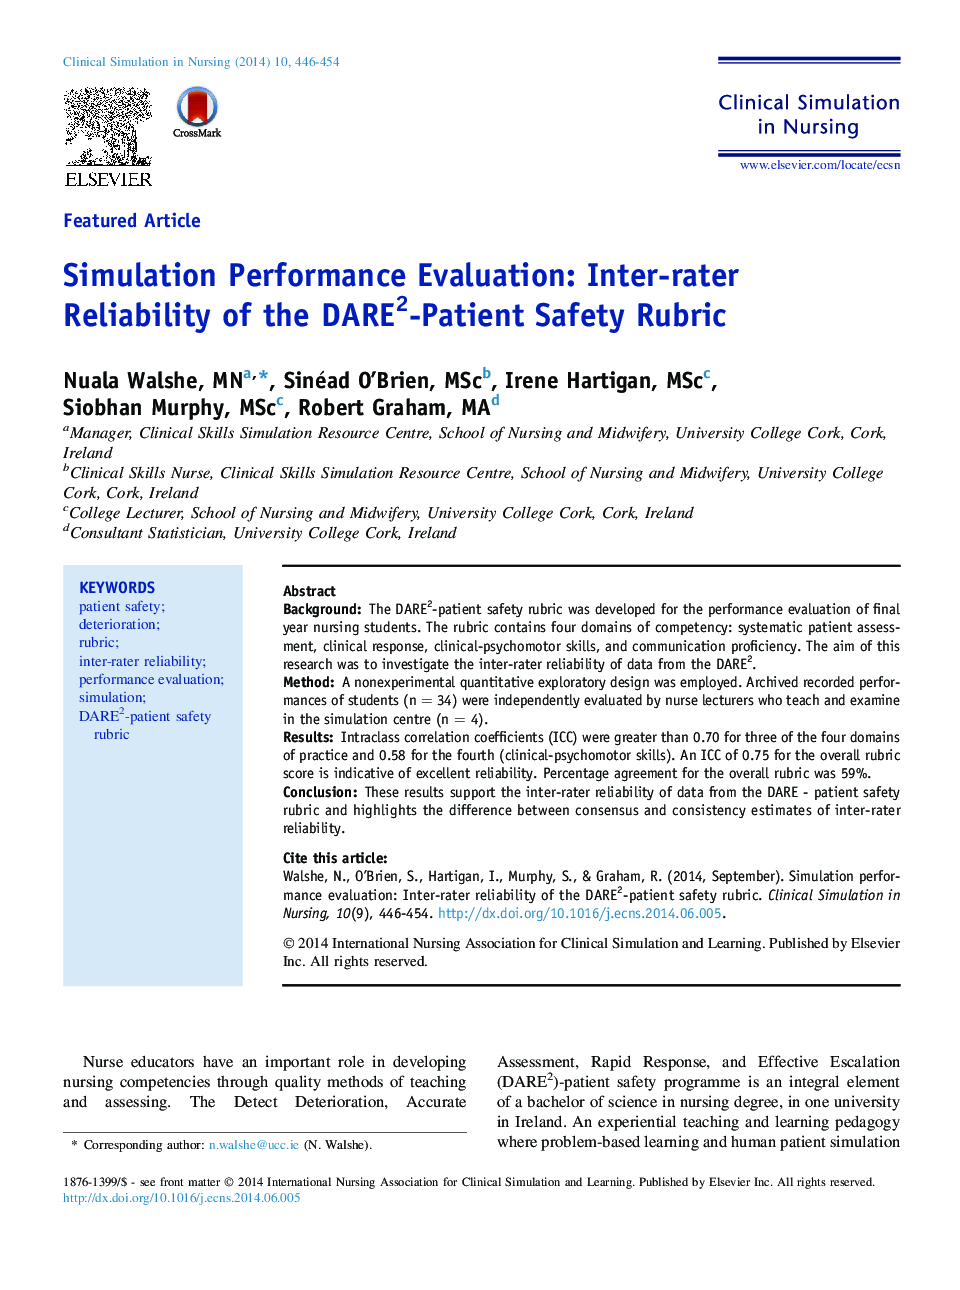 Simulation Performance Evaluation: Inter-rater Reliability of the DARE2-Patient Safety Rubric